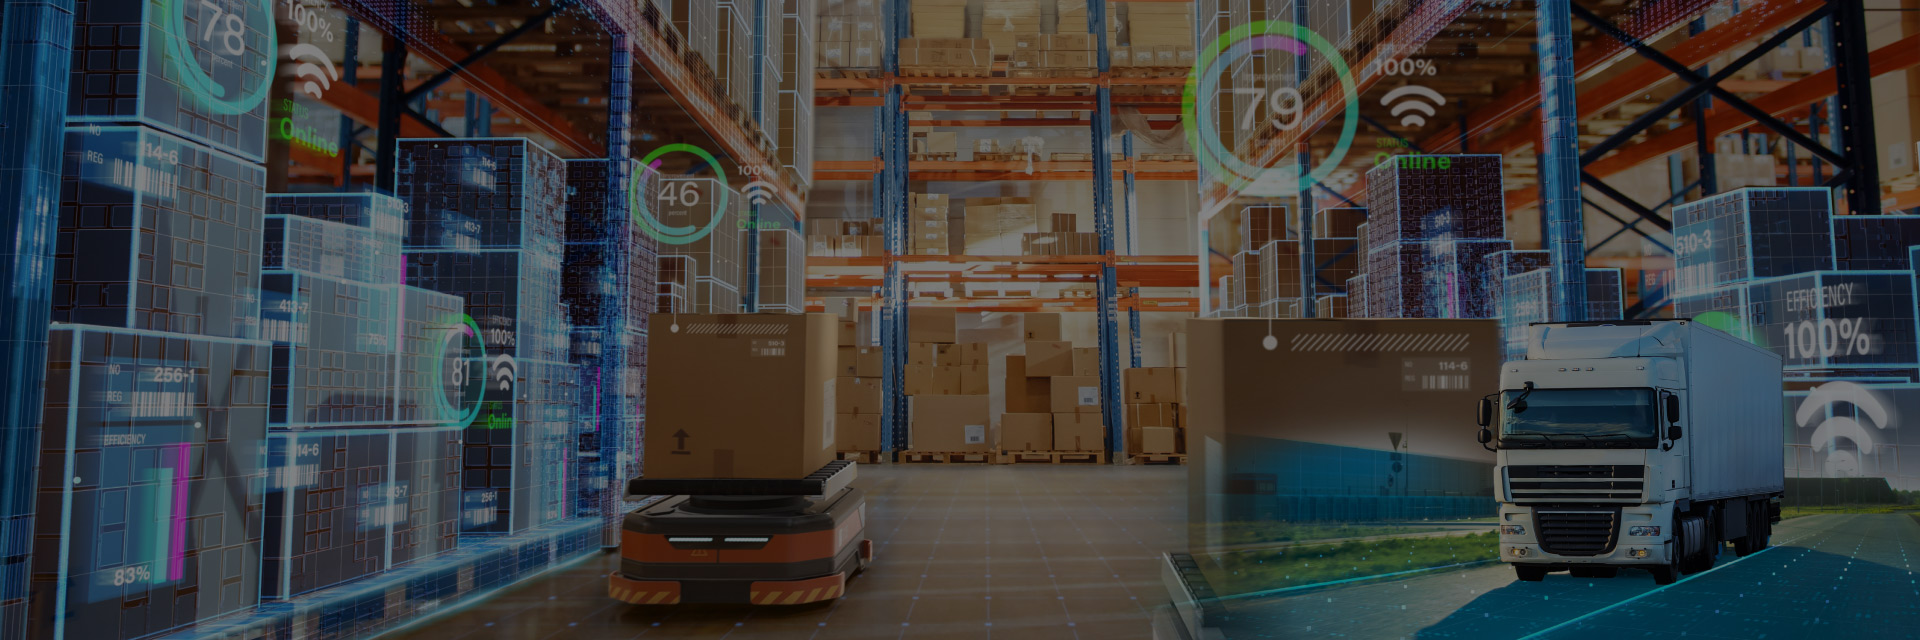 2023 Logistics Solution White Paper
The Perfect Match: Artificial Intelligence and Global Logistics